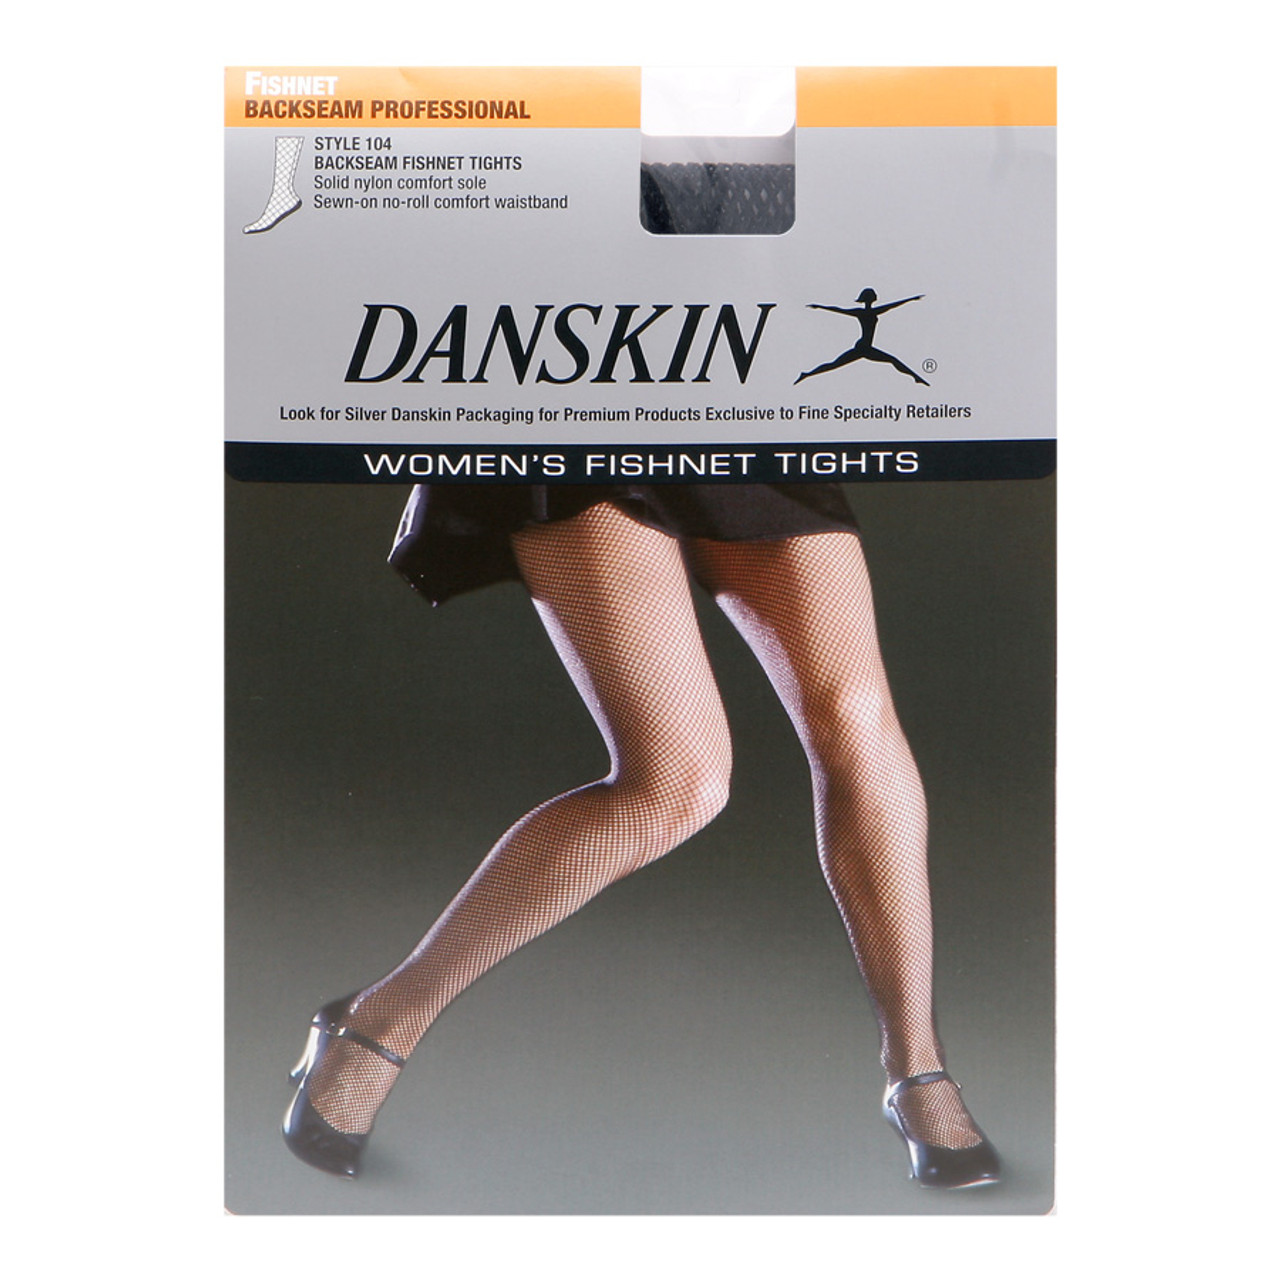 Professional Back Seam Fishnet Tights with Lined Foot